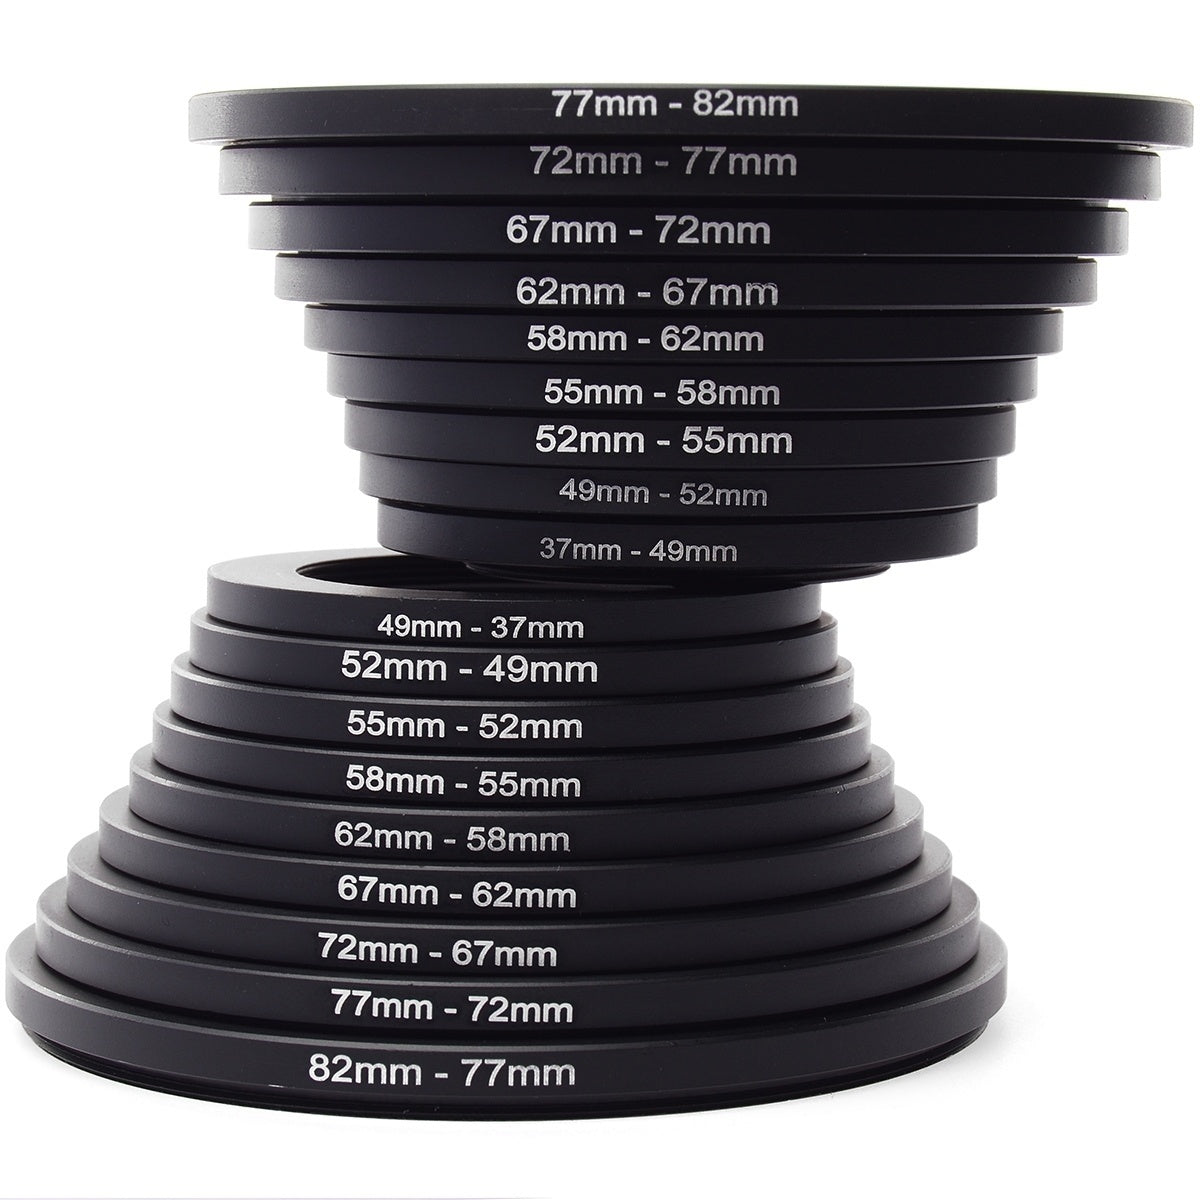 18pcs Step Up Down Lens Filter Stepping Adapter Ring 9x Step Up + 9x Step Down 37 49 52 55 58 62 67 72 77 82mm for Nikon Canon Sony DSLR Camera Lens